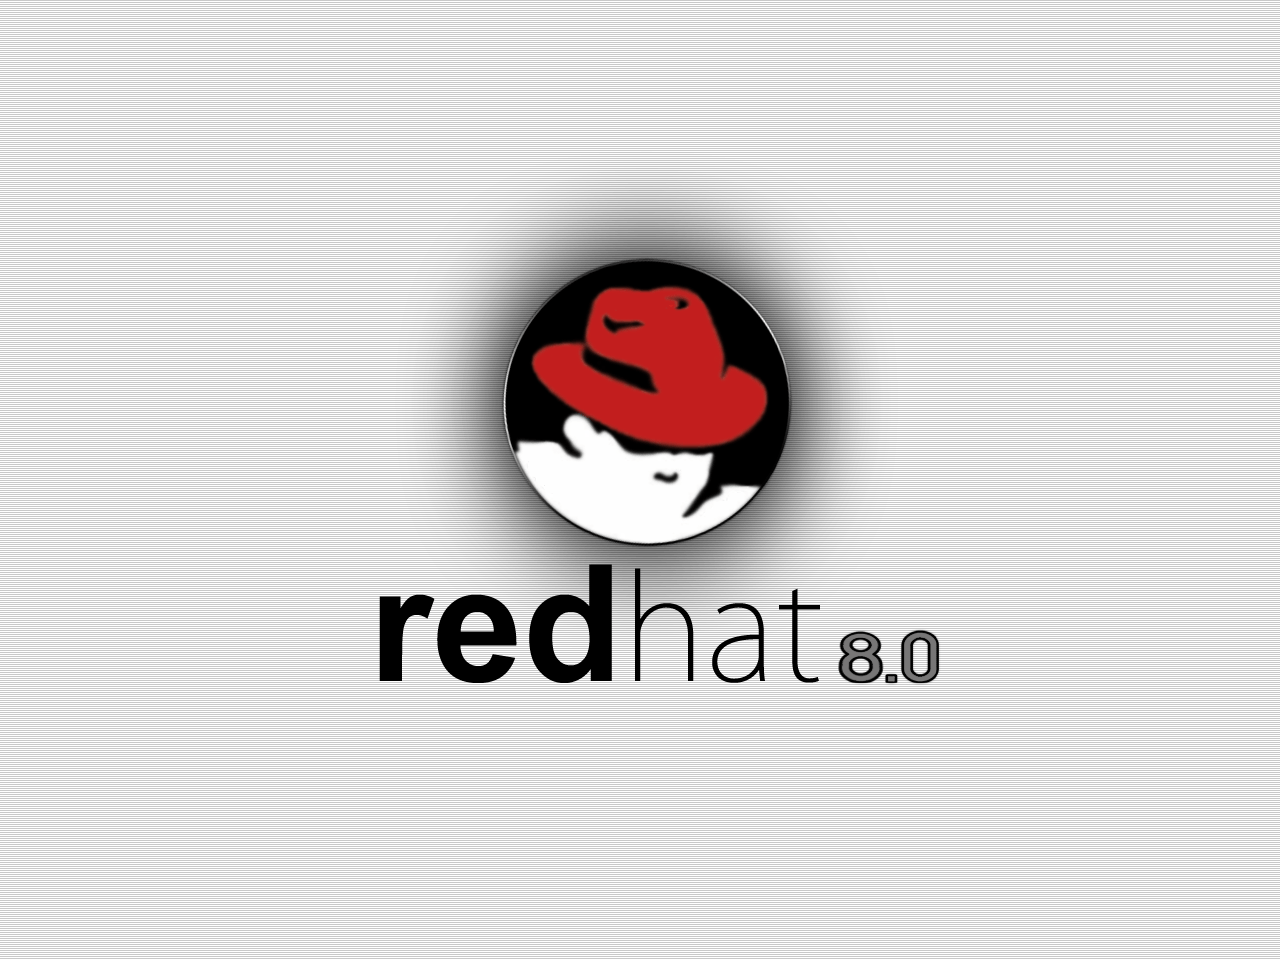 Redhat 8 Wallpapers by makrivag.